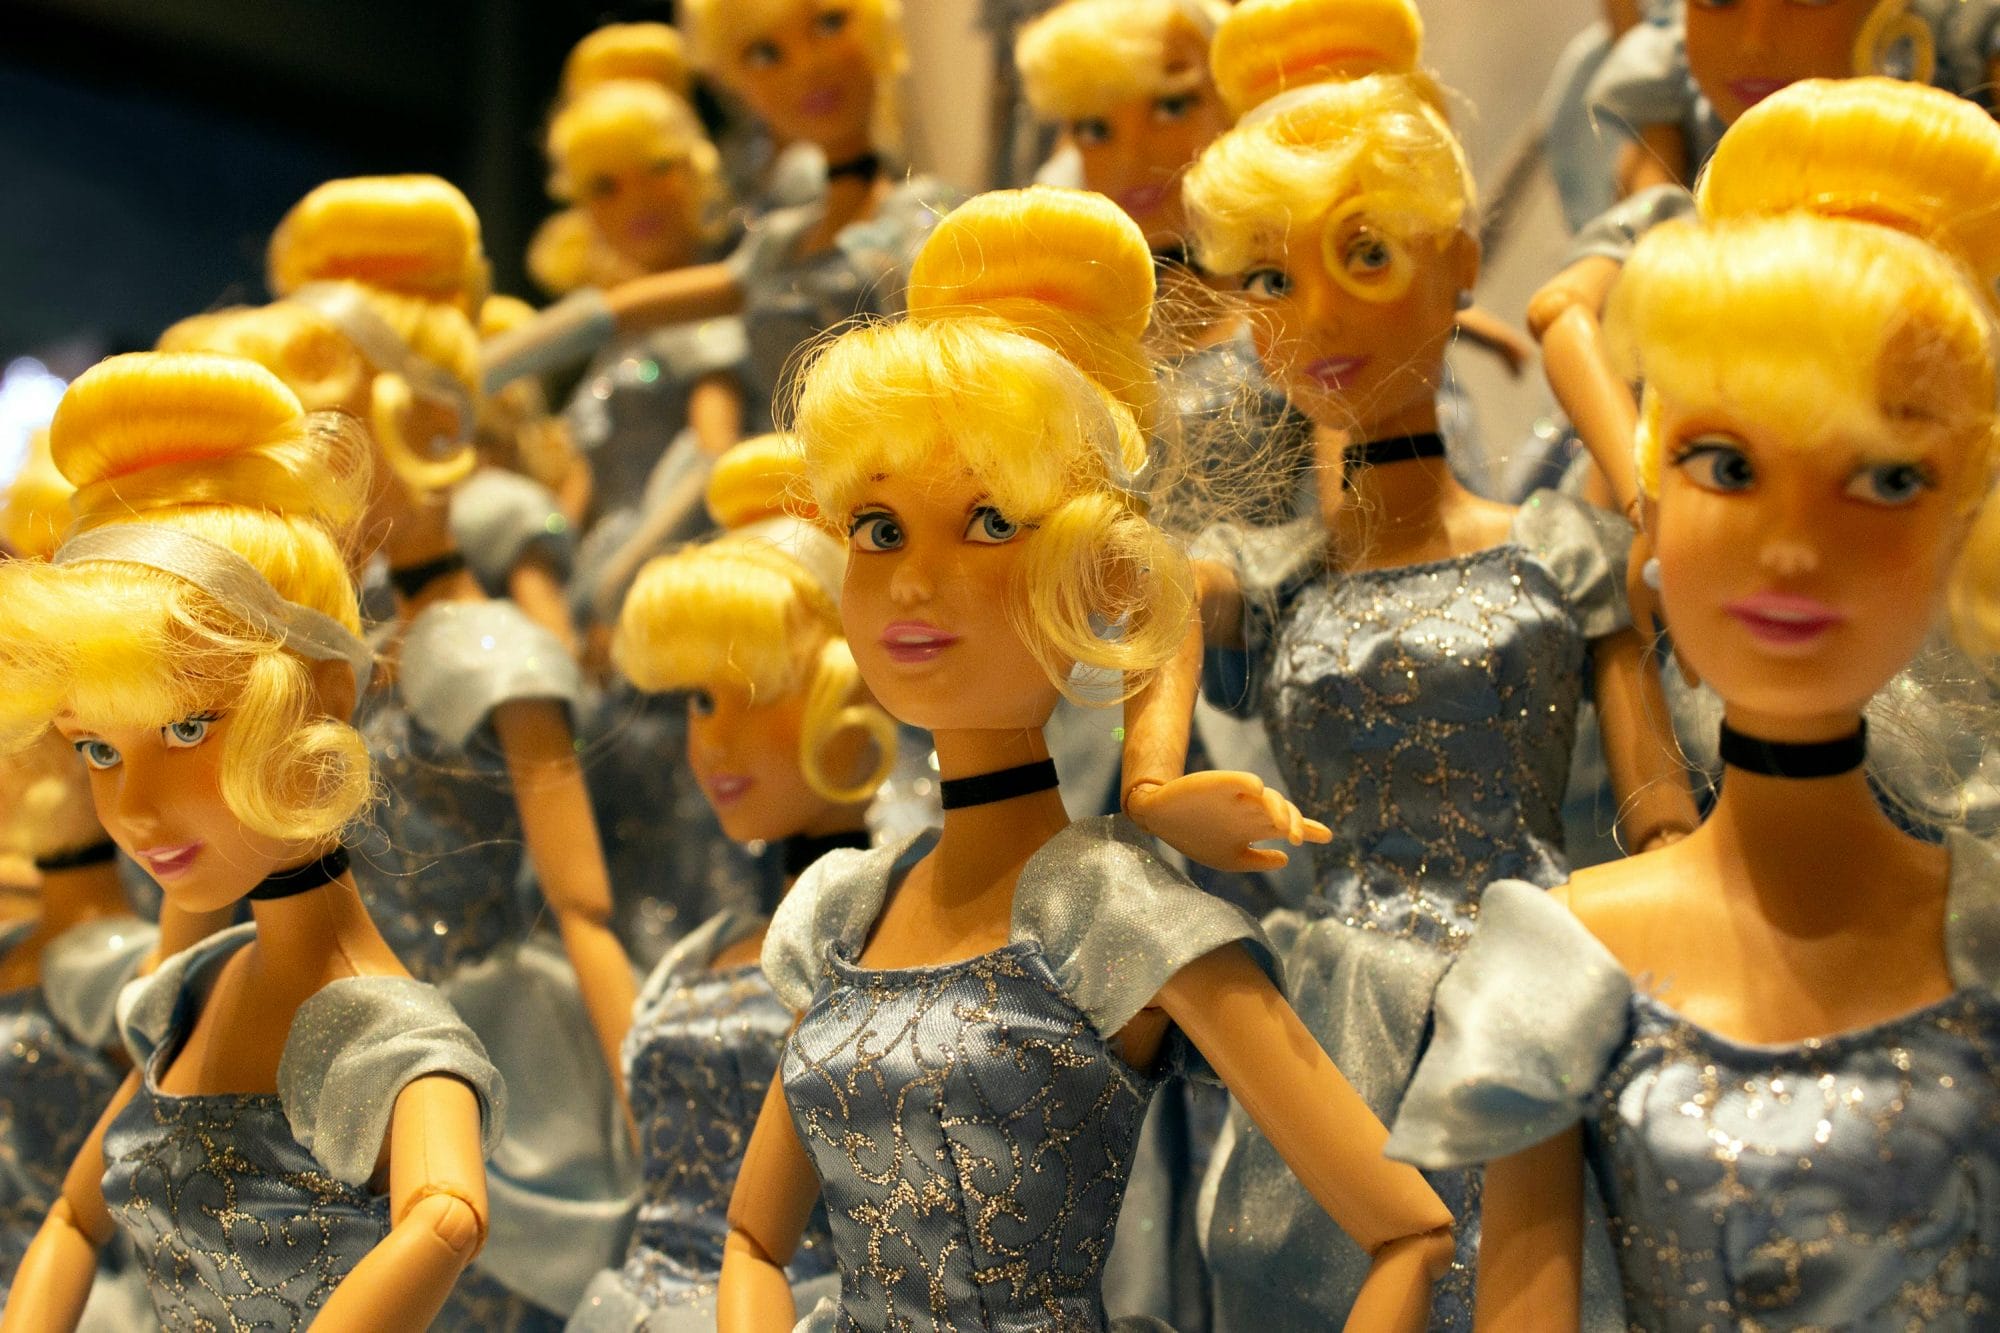 Barbie Turns 65 In A World Of Vast Doll Diversity